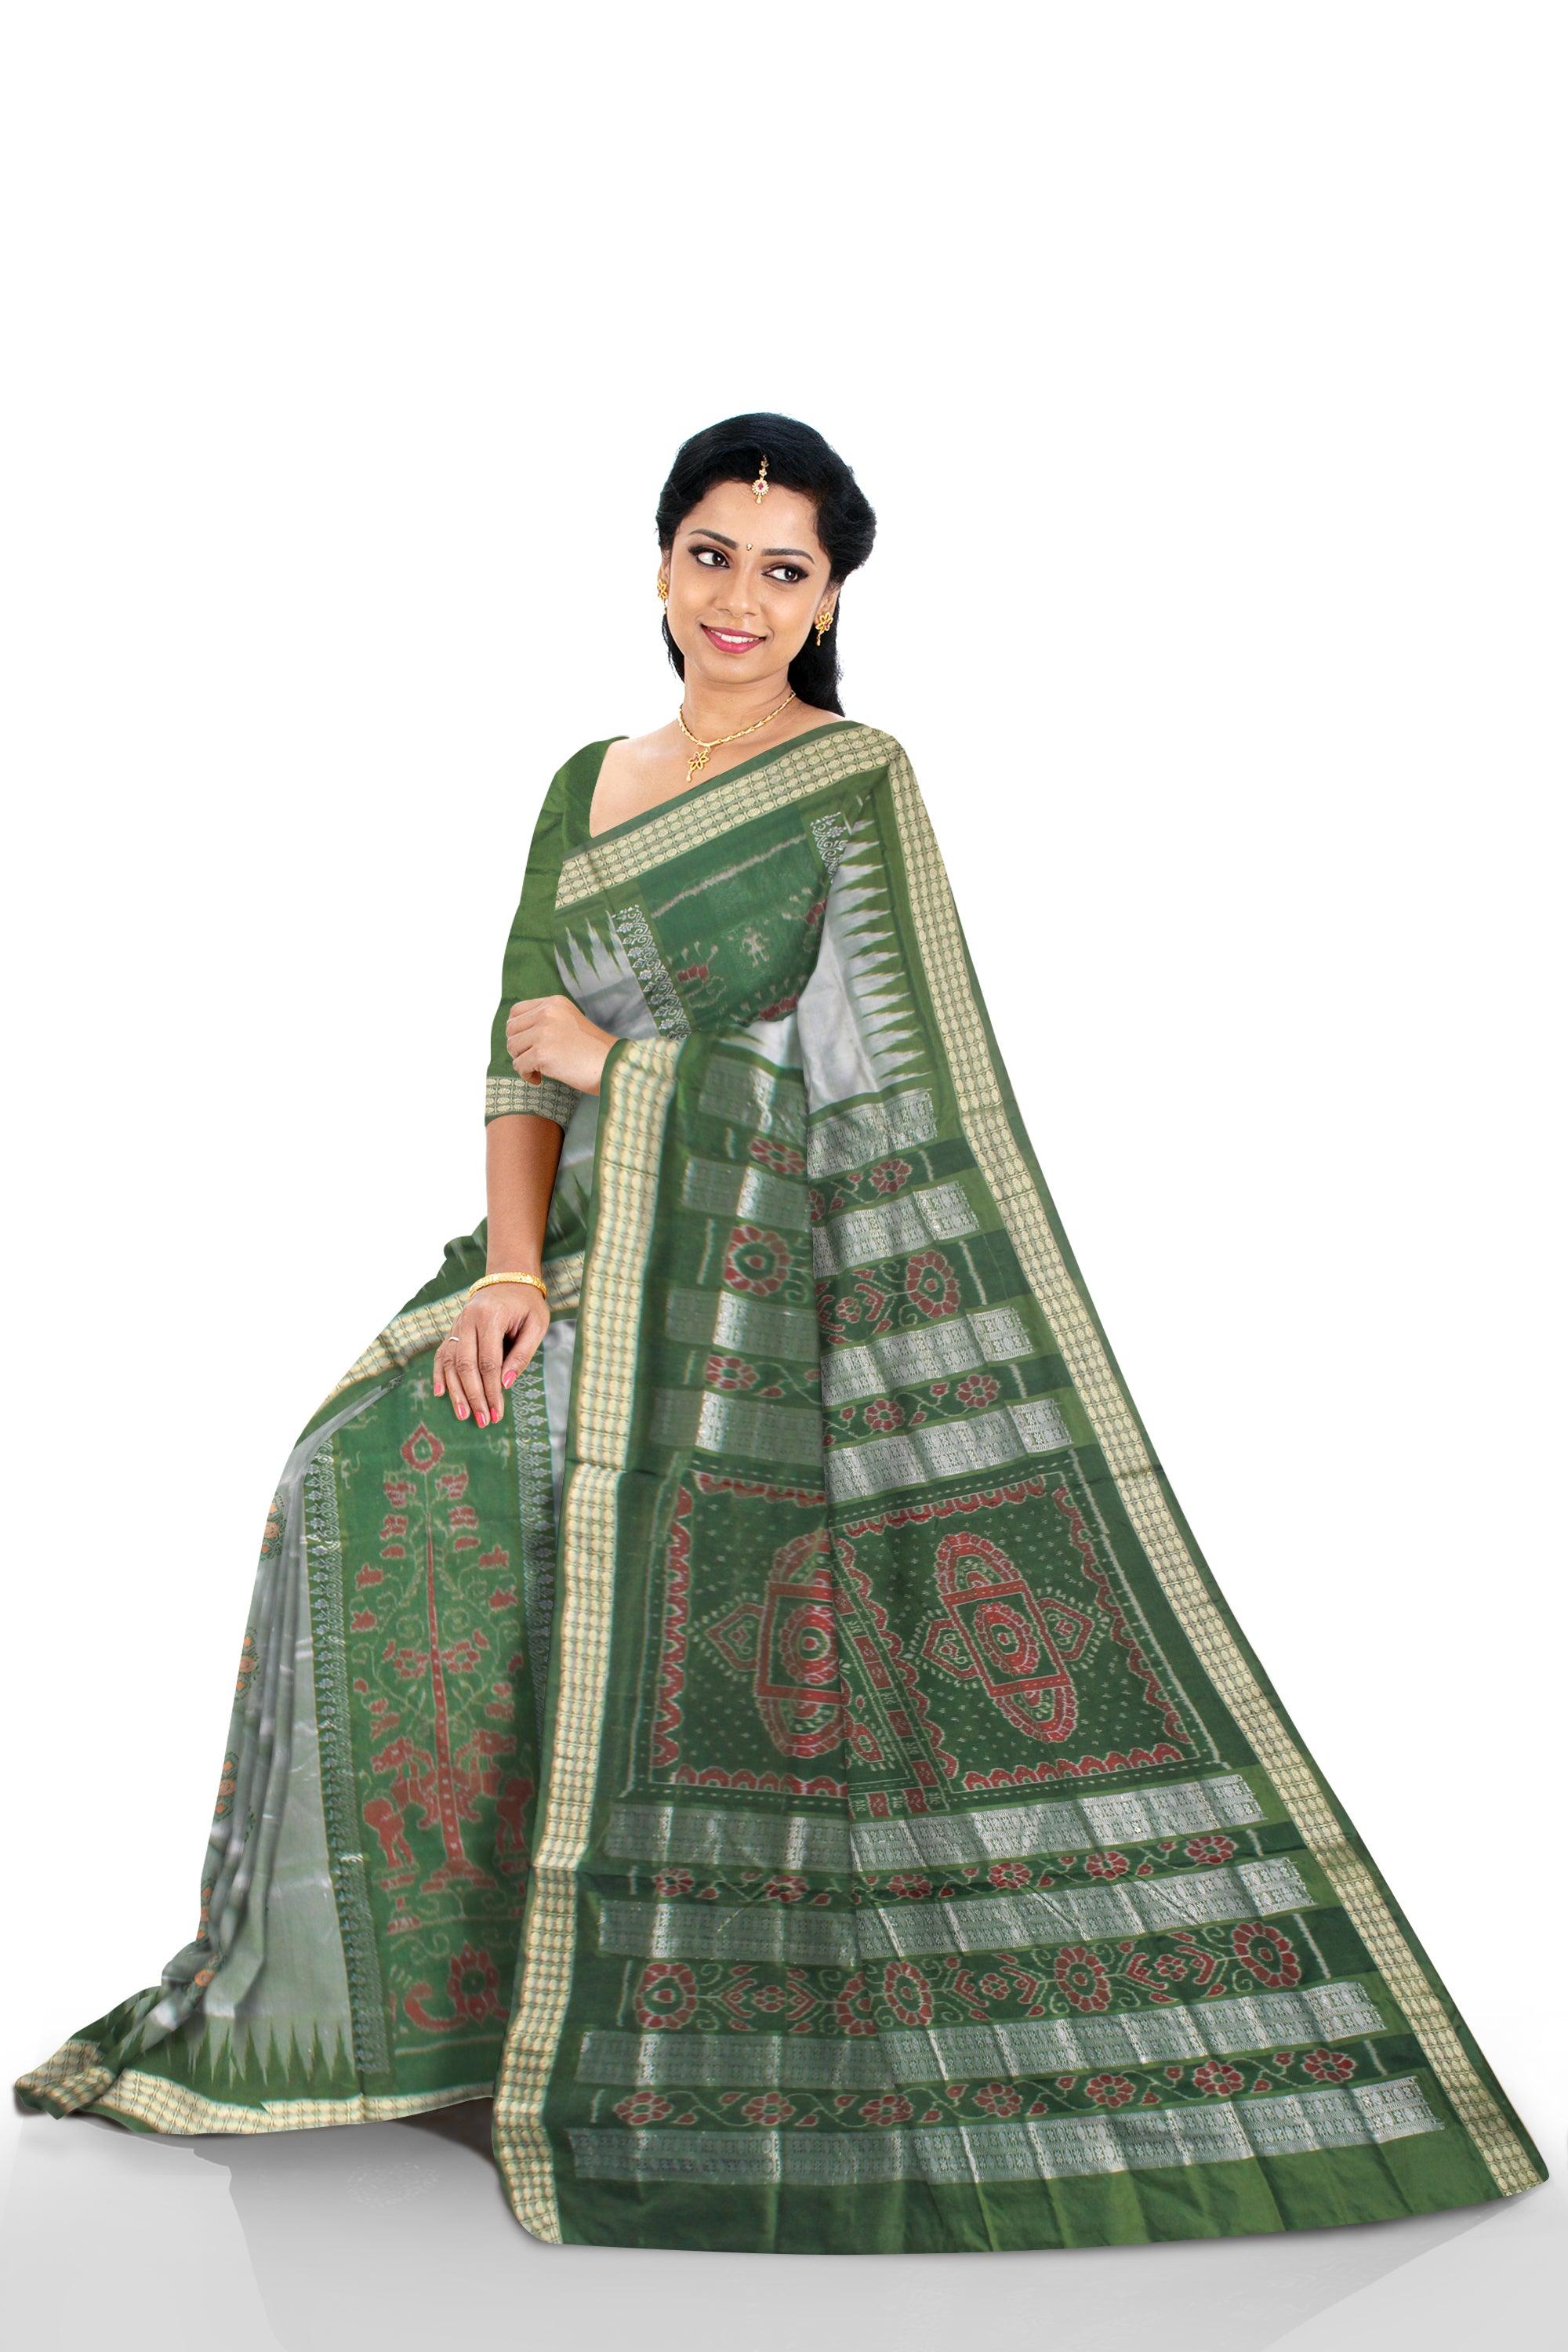 BANDHA PATTERN GREEN SILVER AND LIGHT GREEN COLOR SILK SAREE, ATTACHED WITH BLOUSE PIECE. - Koshali Arts & Crafts Enterprise